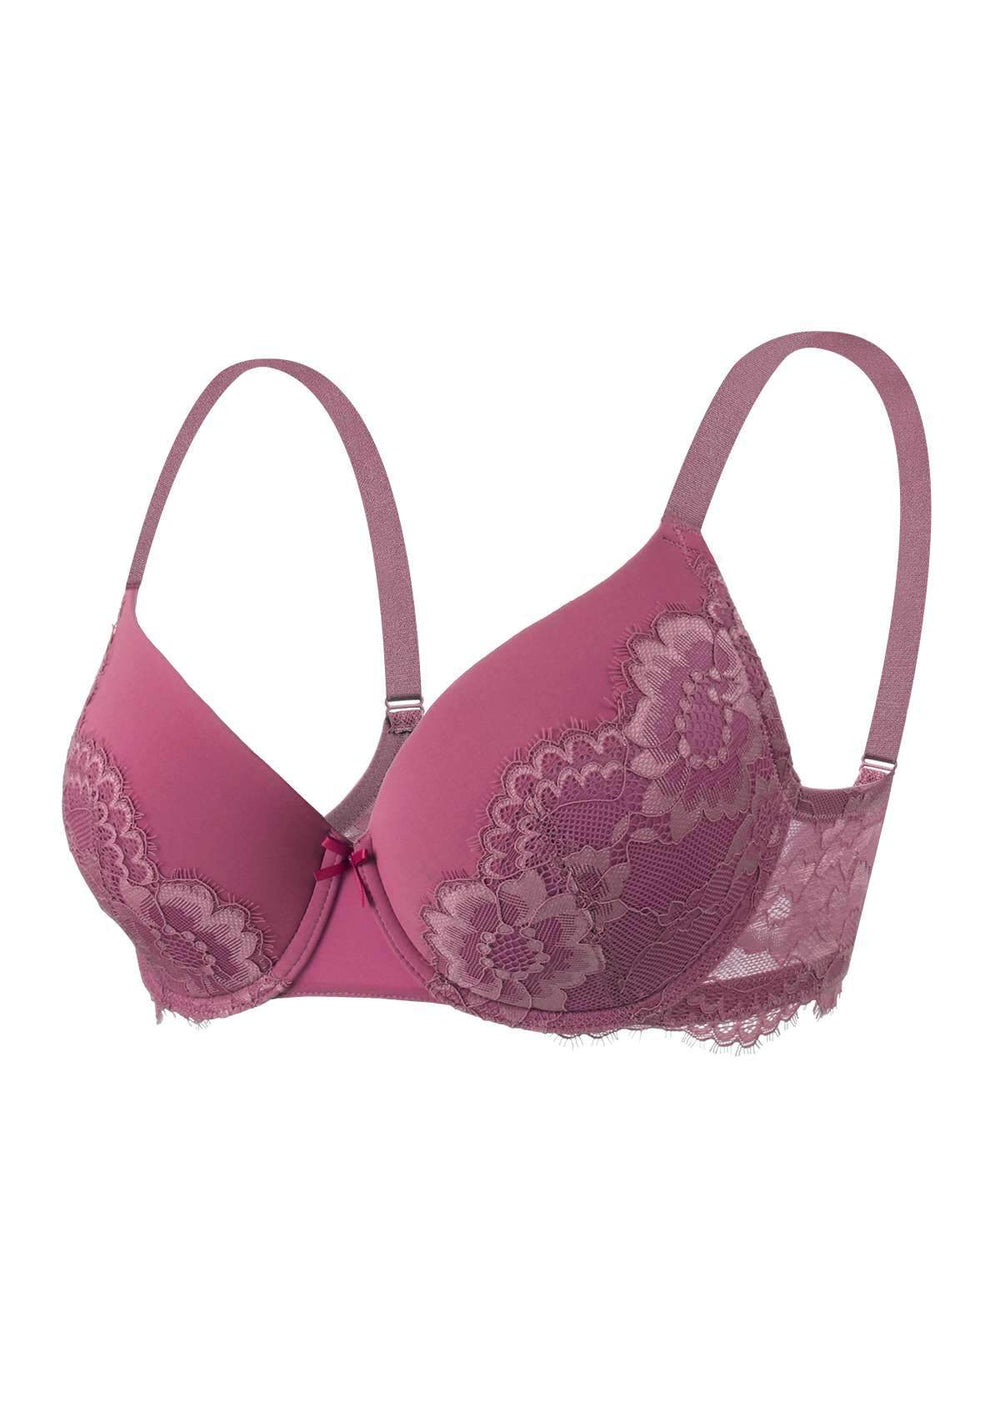 Wholesale Memory Foam Bra Cup For All Your Intimate Needs 